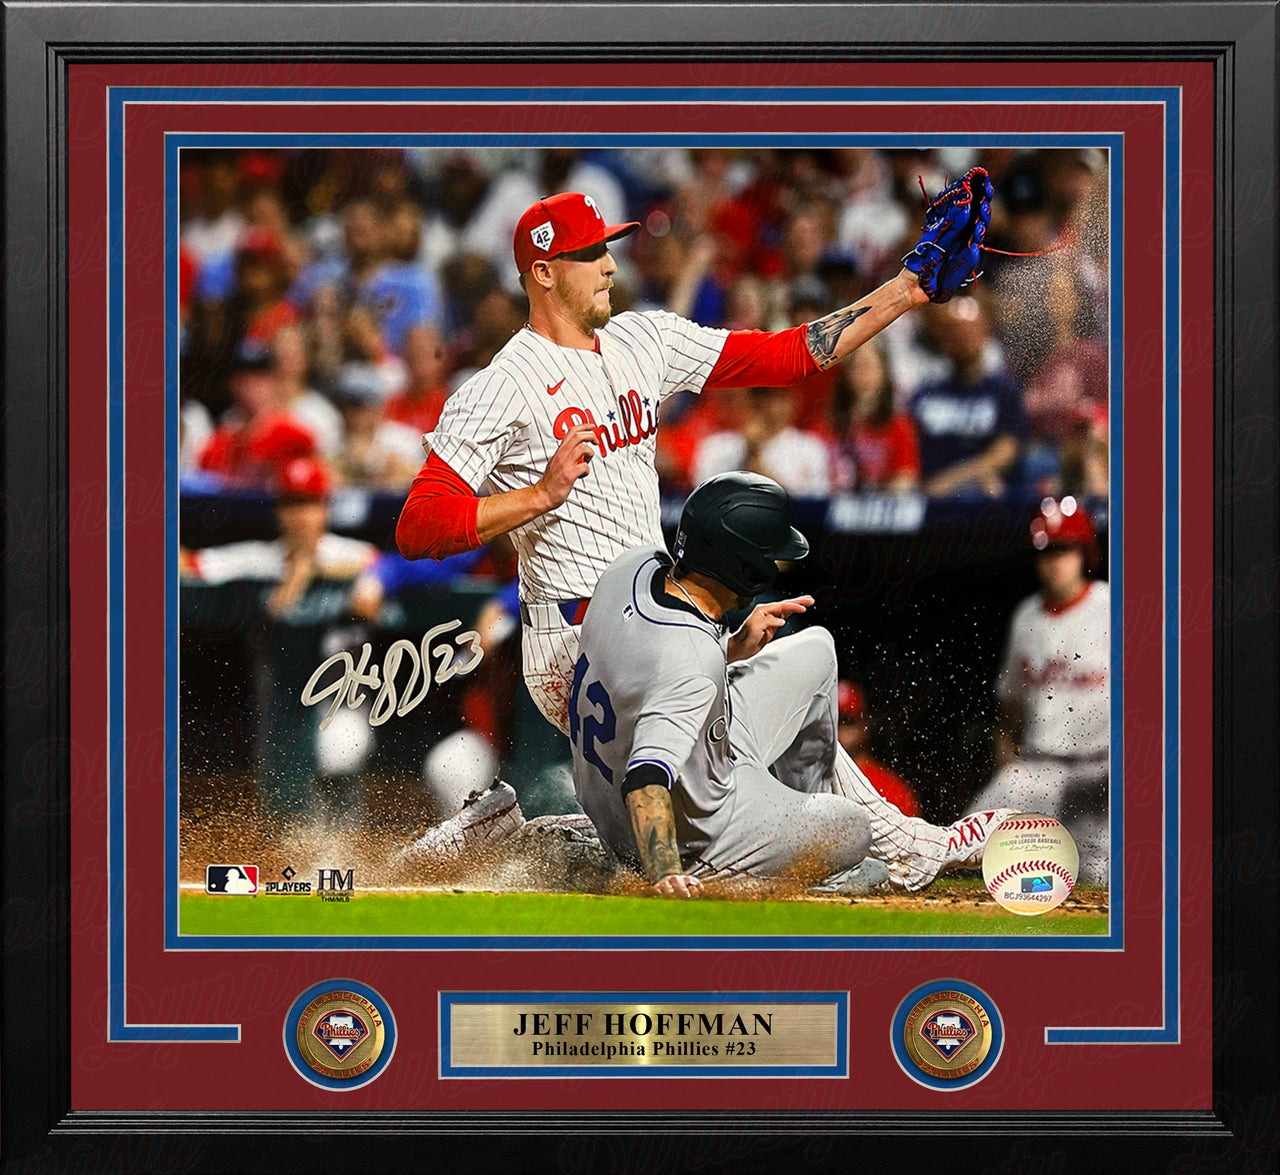 Jeff Hoffman Play at the Plate Philadelphia Phillies Autographed 16" x 20" Framed Baseball Photo